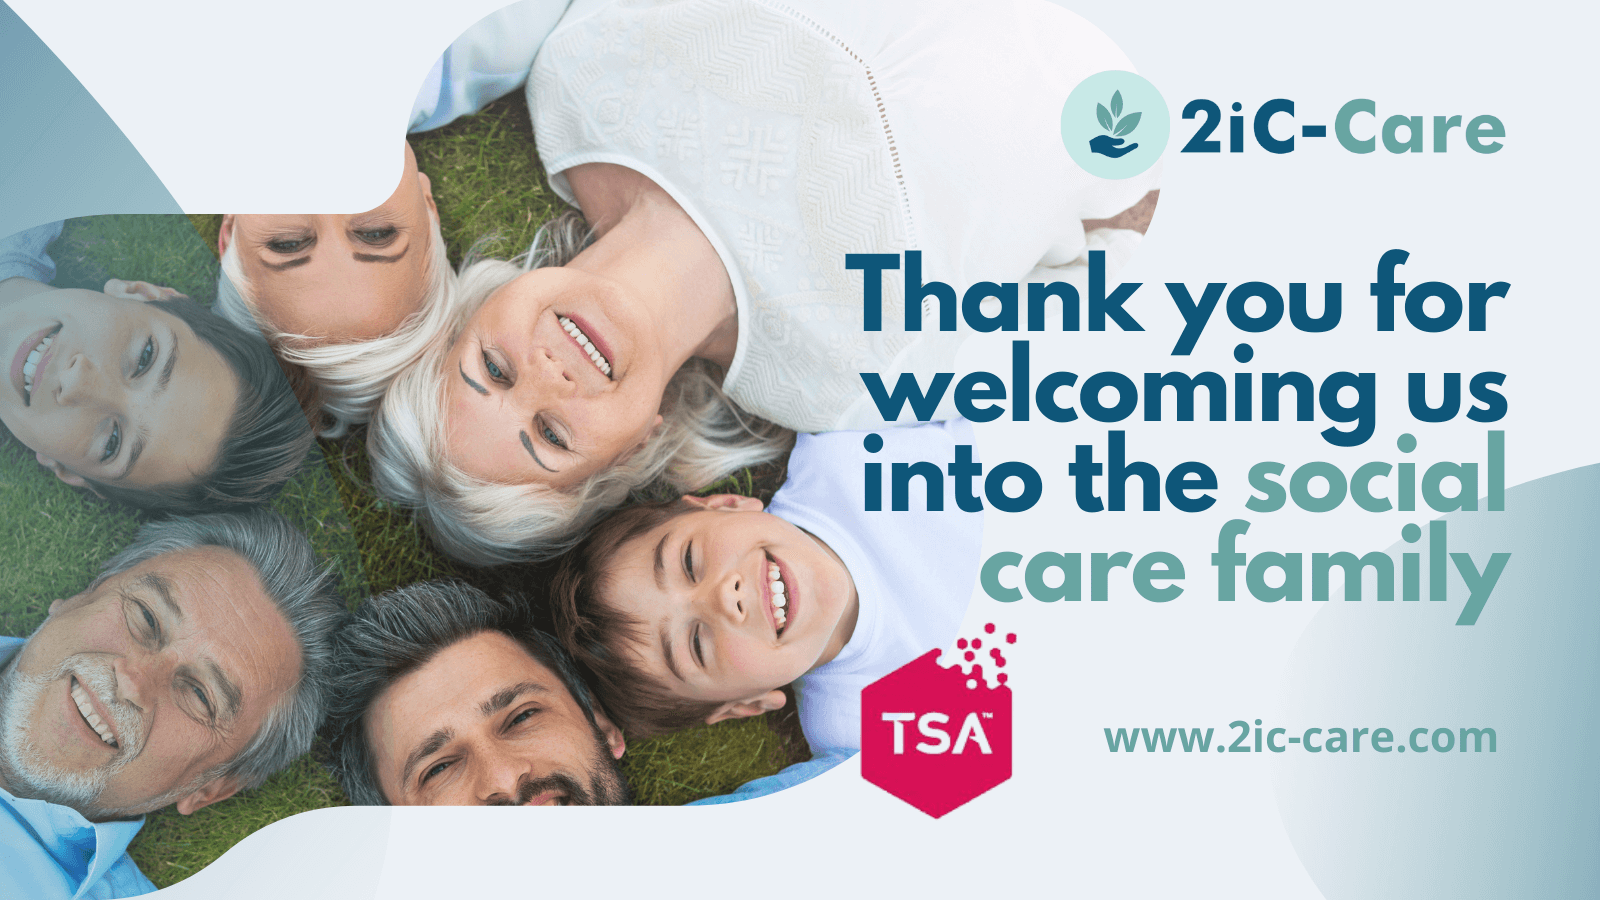 We joined the TSA social care family with our TEC solution